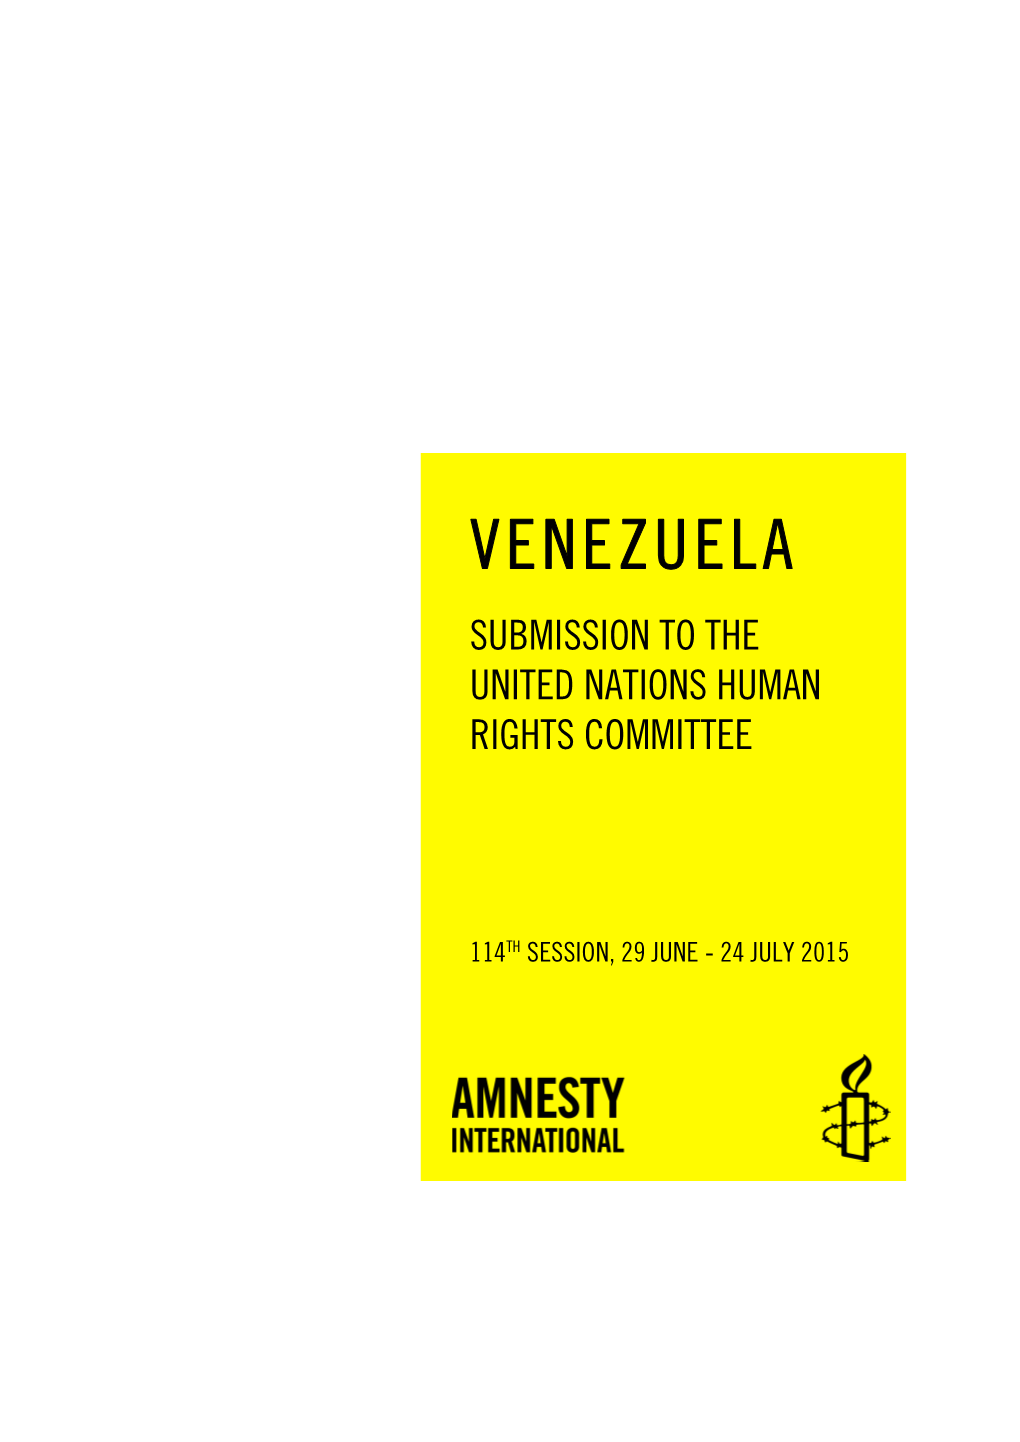 Venezuela Submission to the United Nations Human Rights Committee